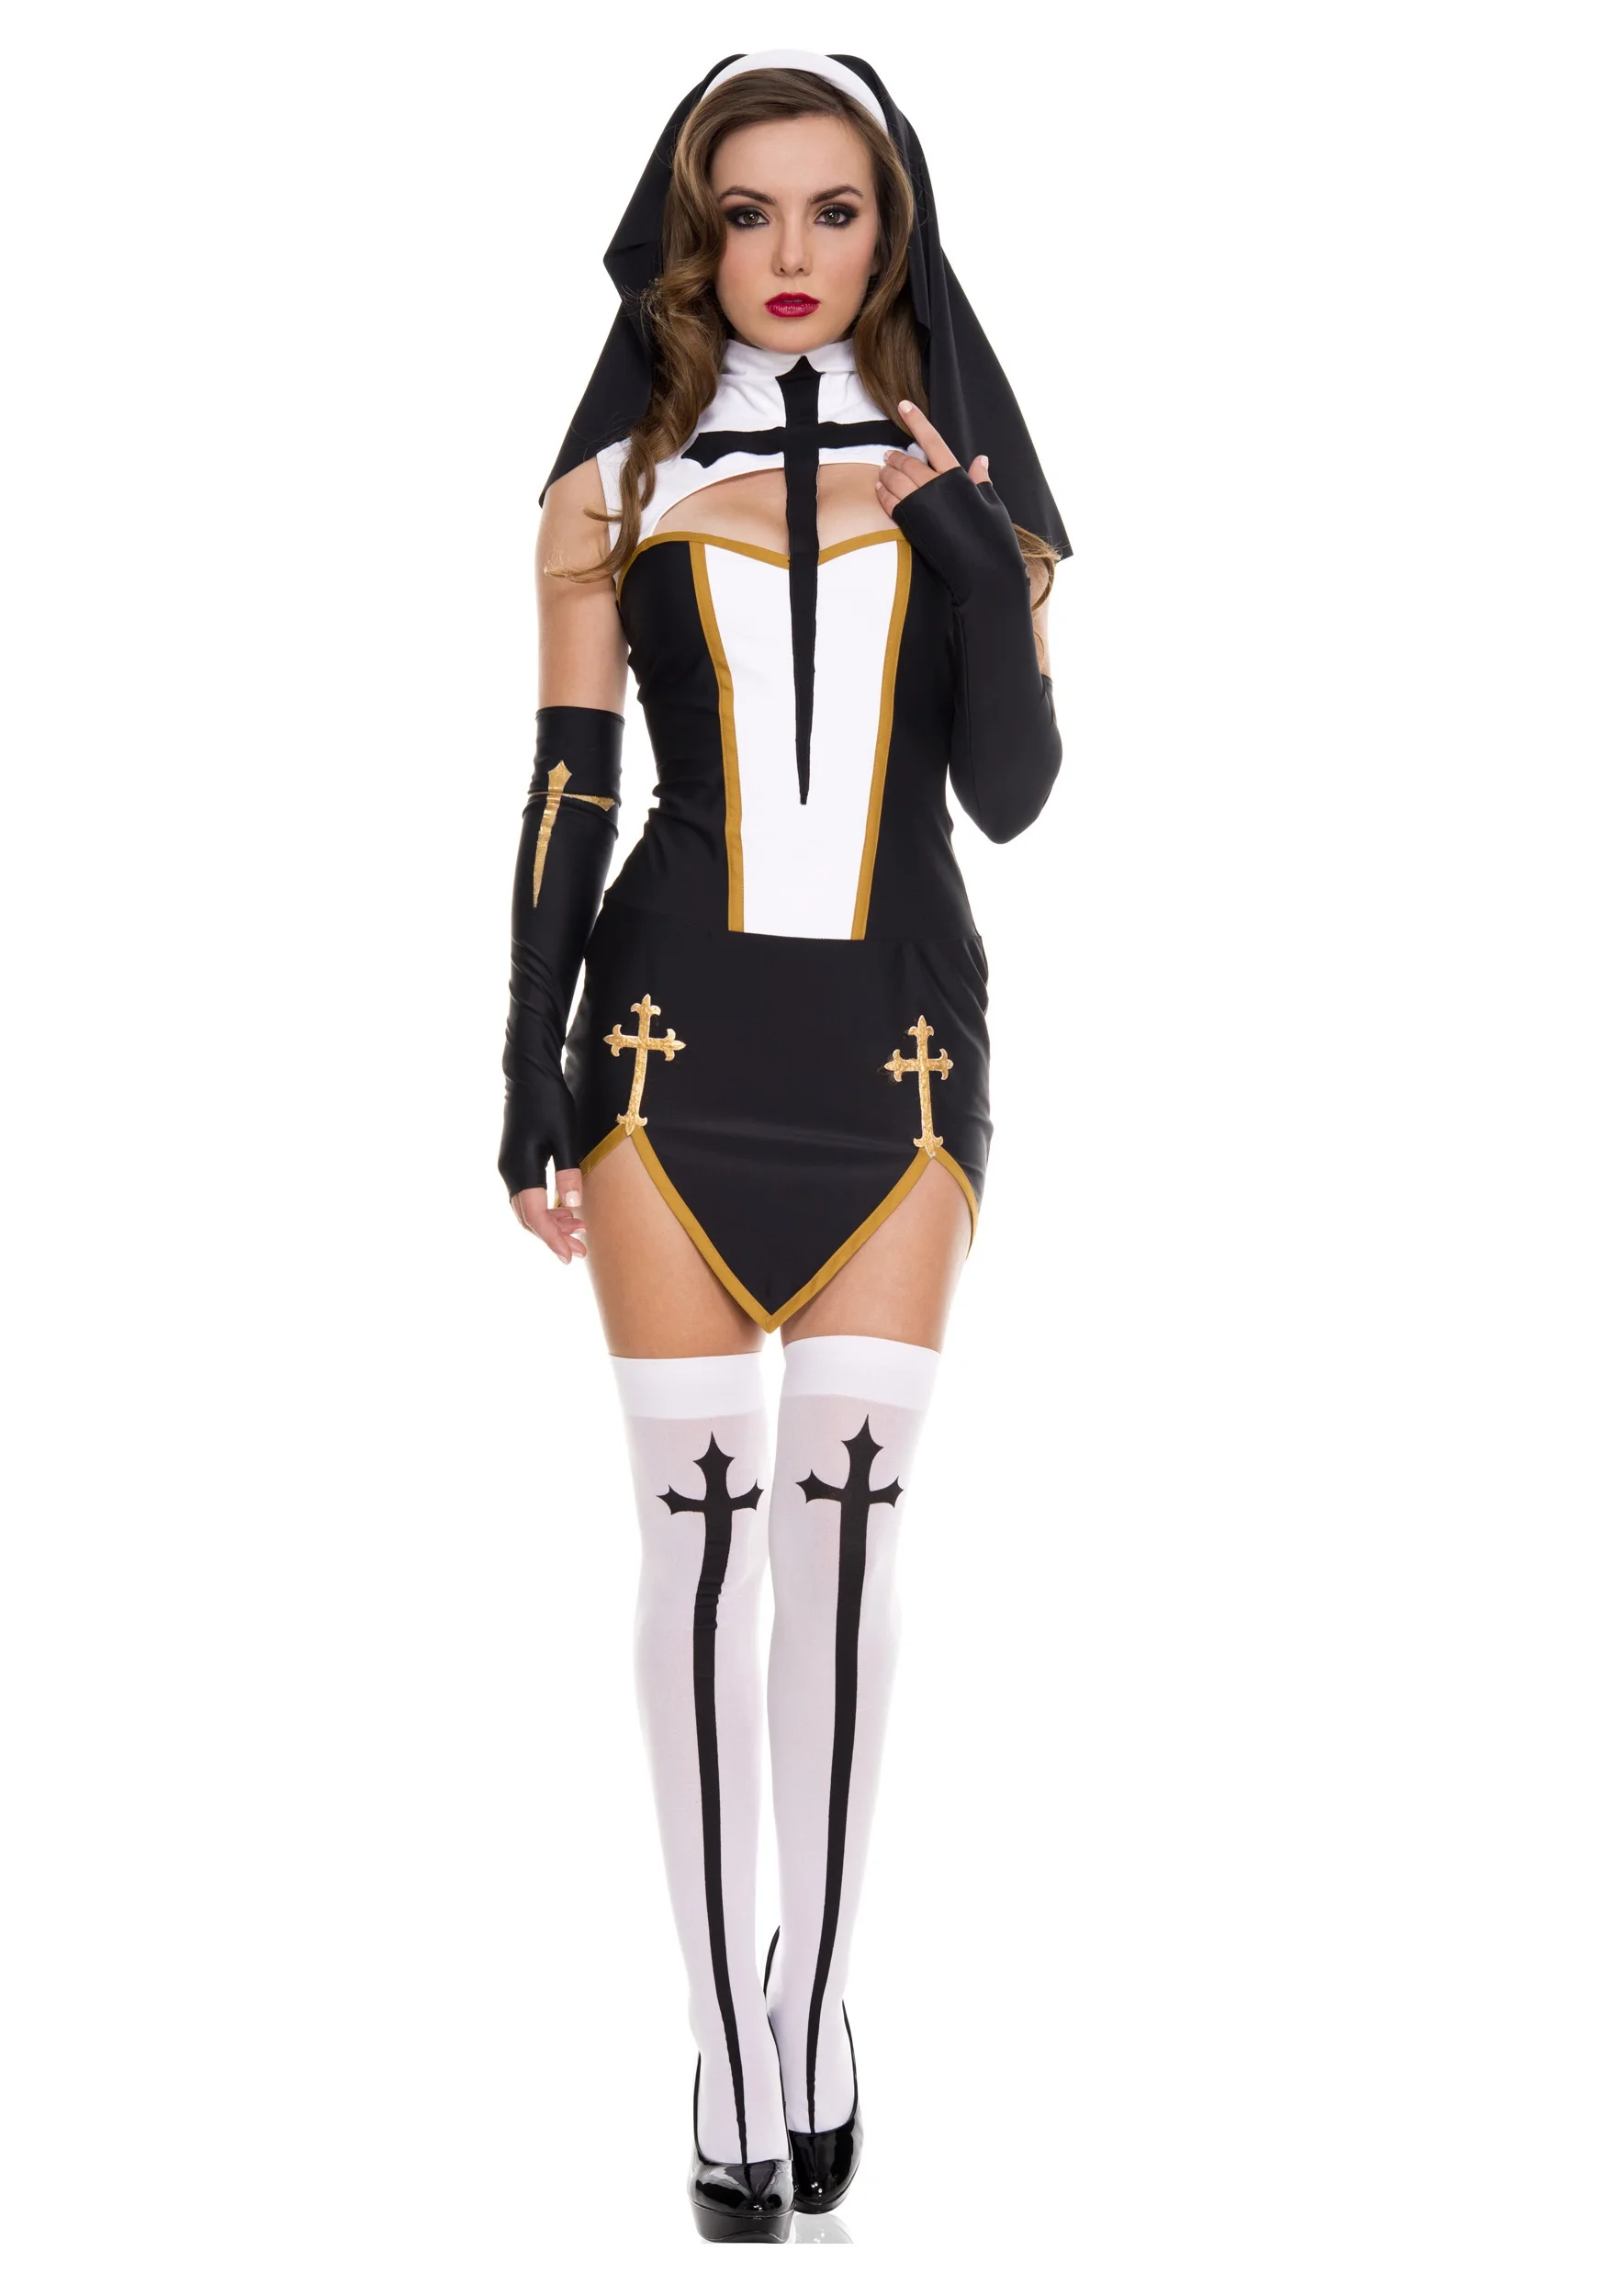 New High Quality Sexy Nun Costumes Adult Women Cosplay Dress Wit.